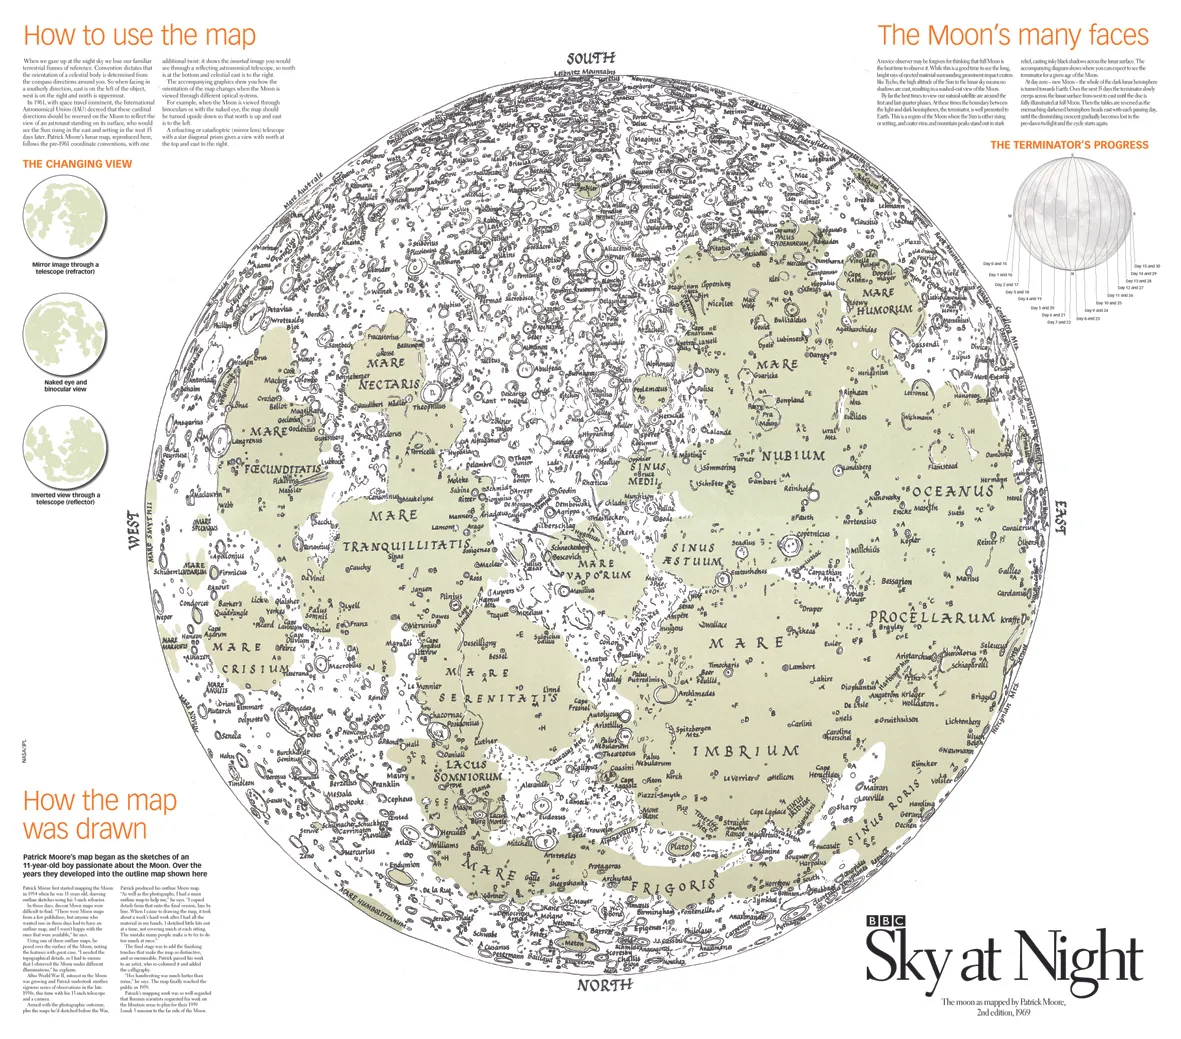 Patrick Moore's map of the Moon was given away as a poster with the first issue of BBC Sky at Night Magazine. Credit: BBC Sky at Night Magazine